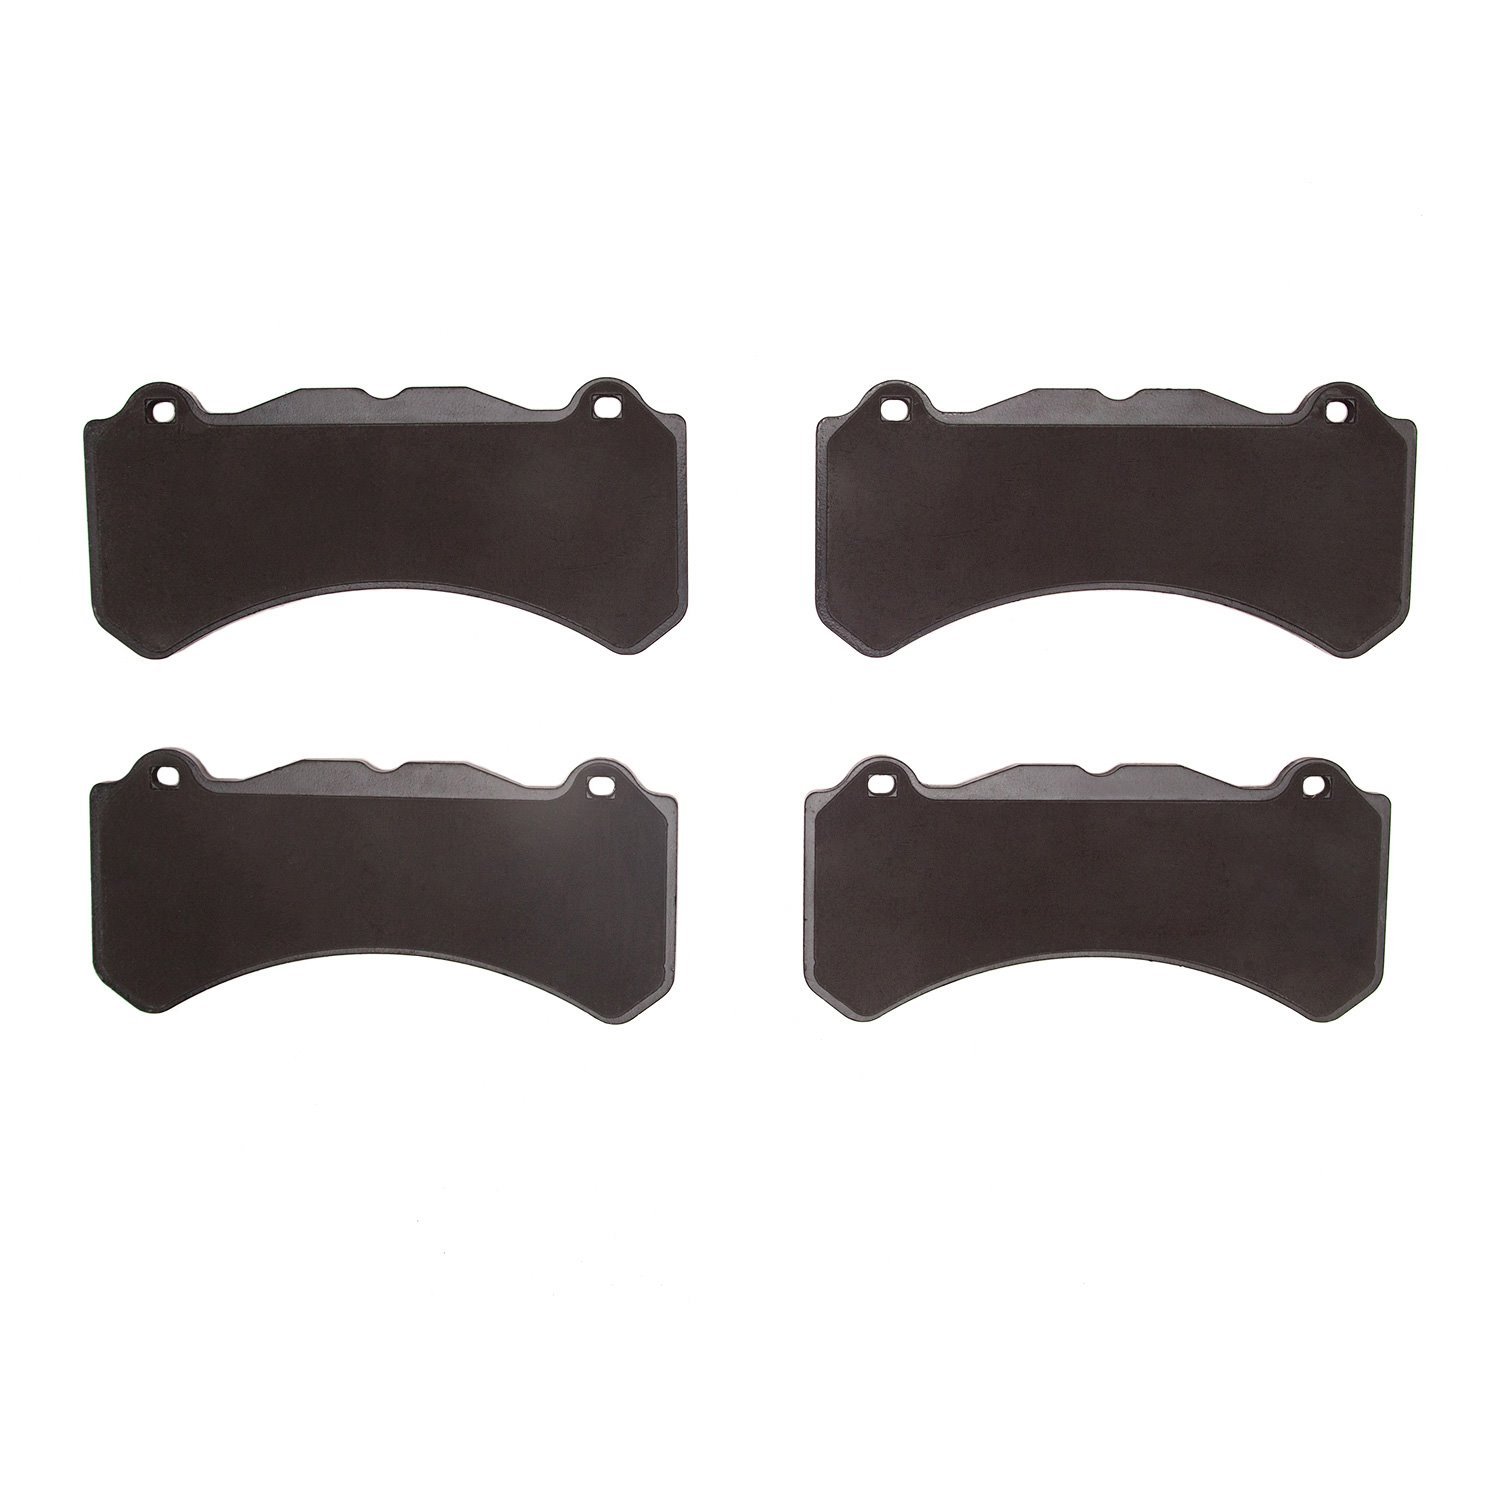 1310-2143-00 3000-Series Ceramic Brake Pads, Fits Select Volvo, Position: Front